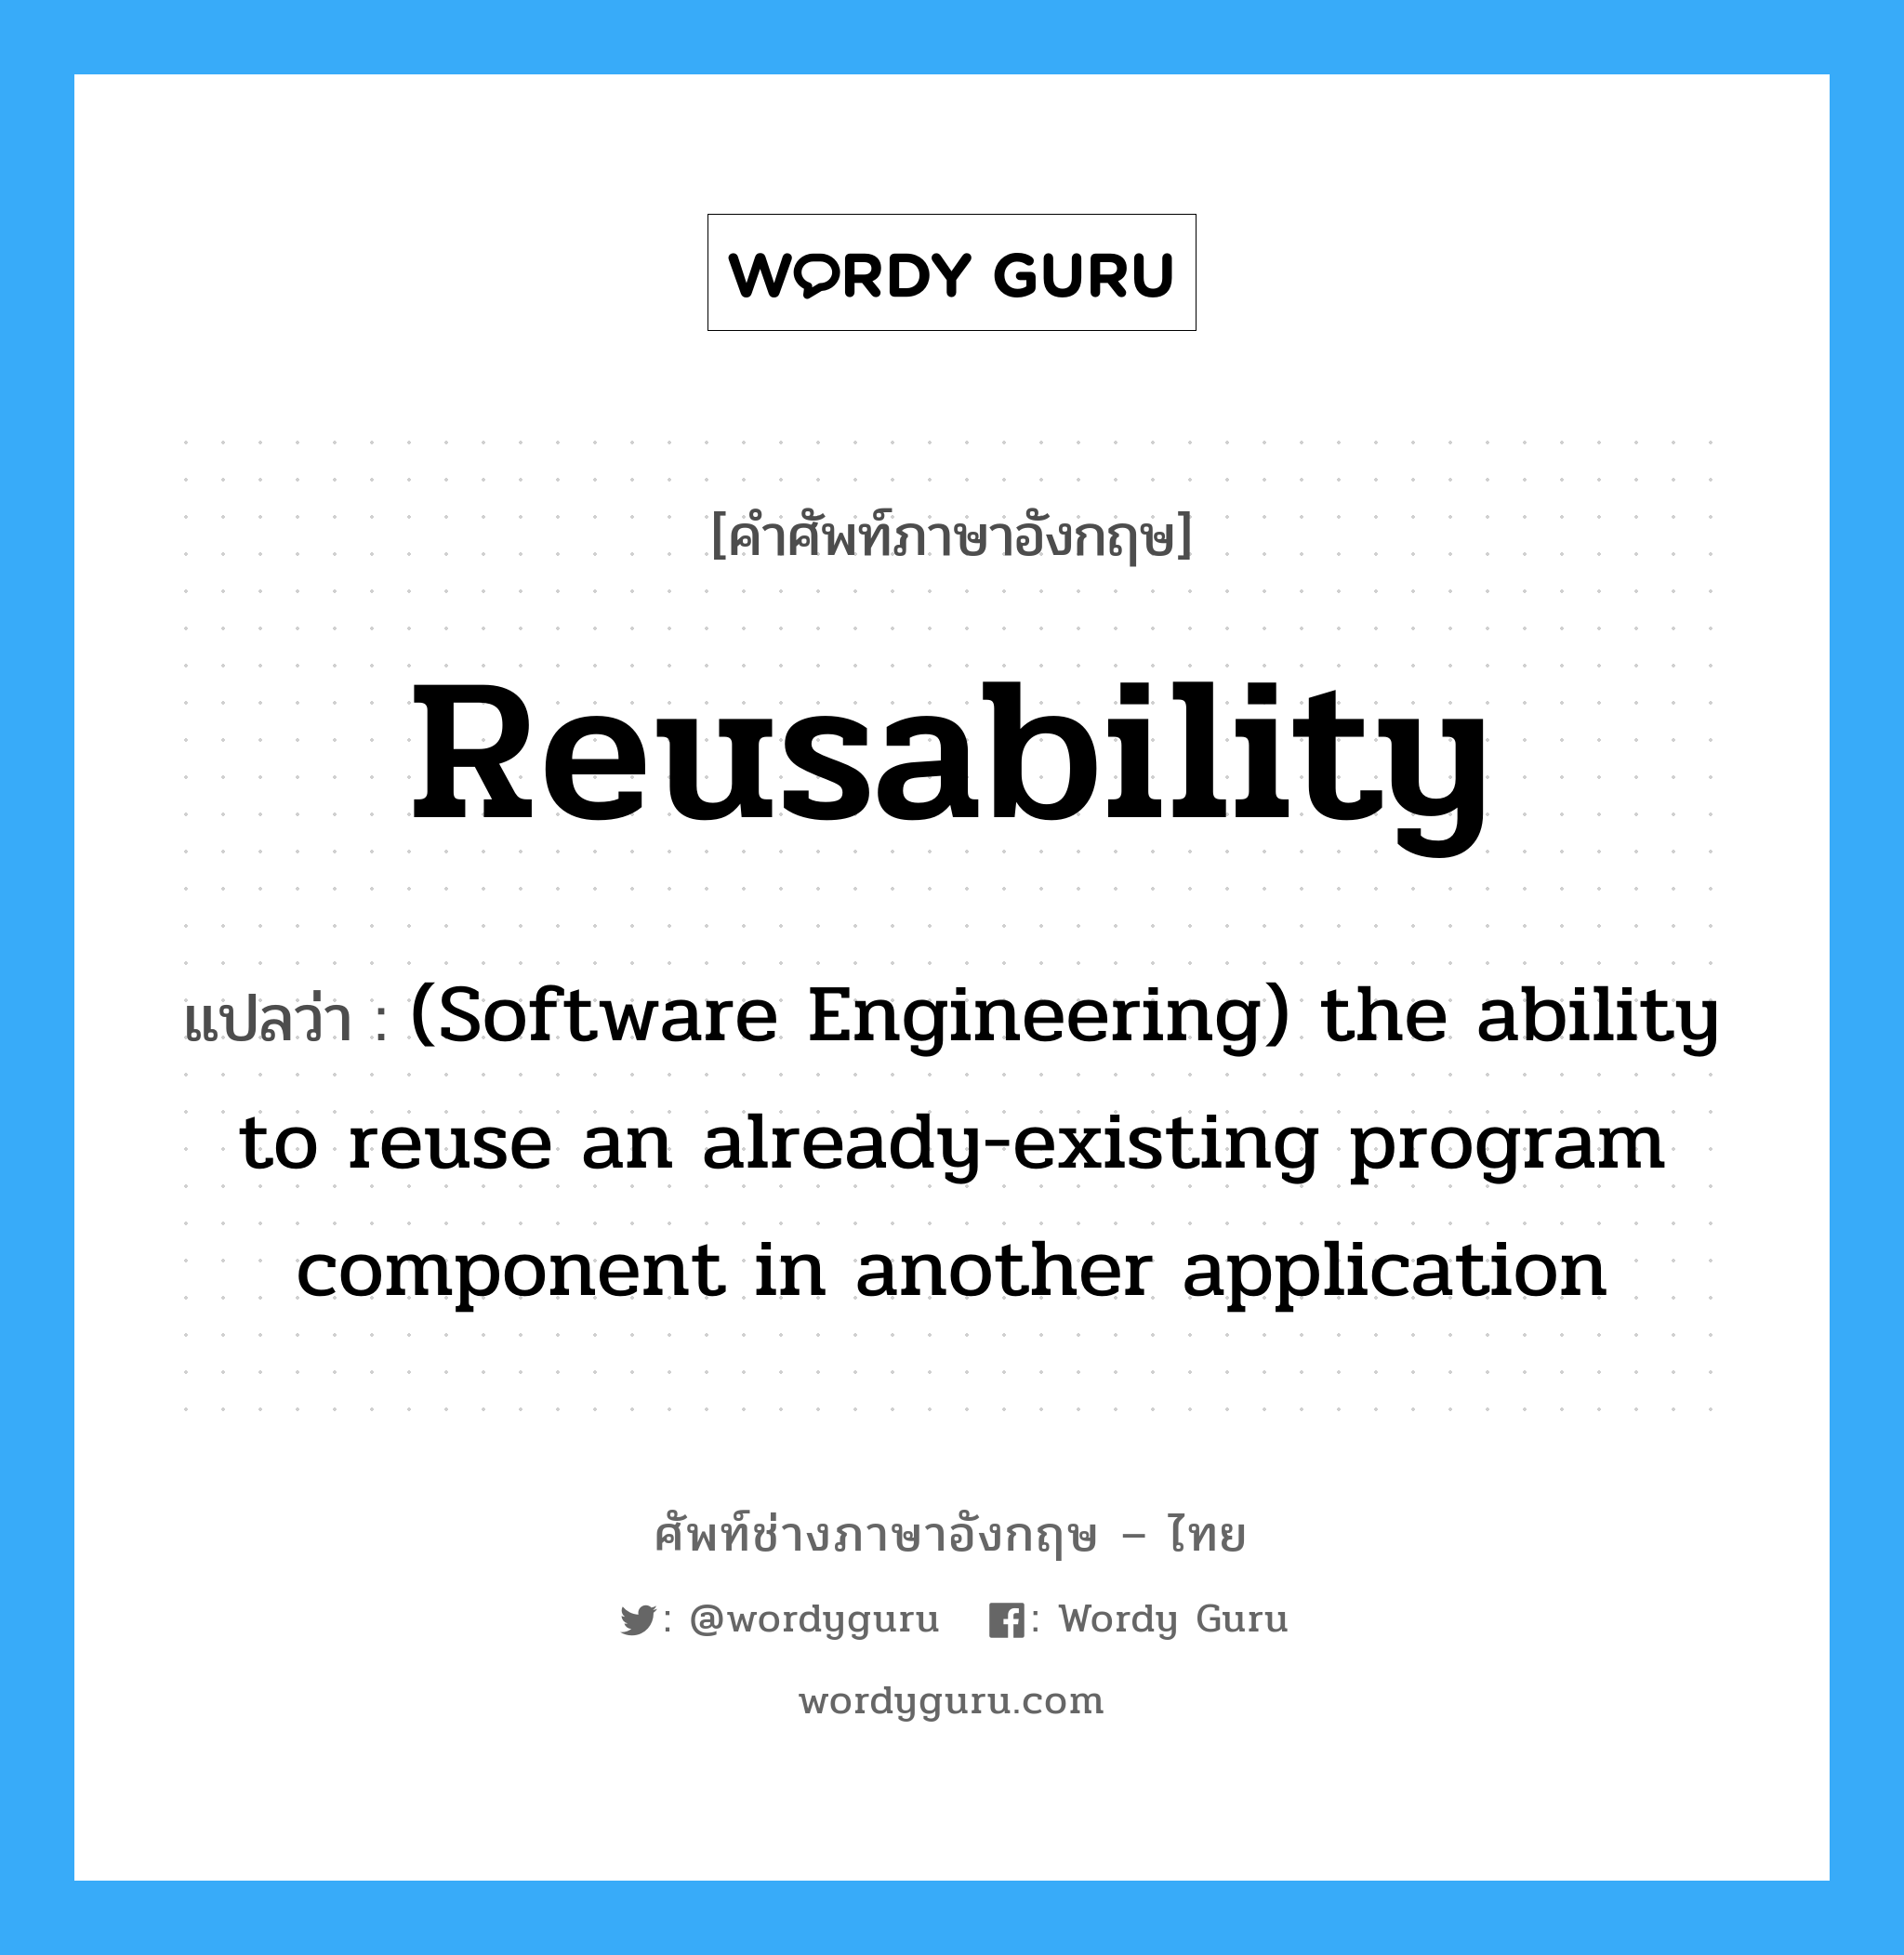 Reusability แปลว่า?, คำศัพท์ช่างภาษาอังกฤษ - ไทย Reusability คำศัพท์ภาษาอังกฤษ Reusability แปลว่า (Software Engineering) the ability to reuse an already-existing program component in another application